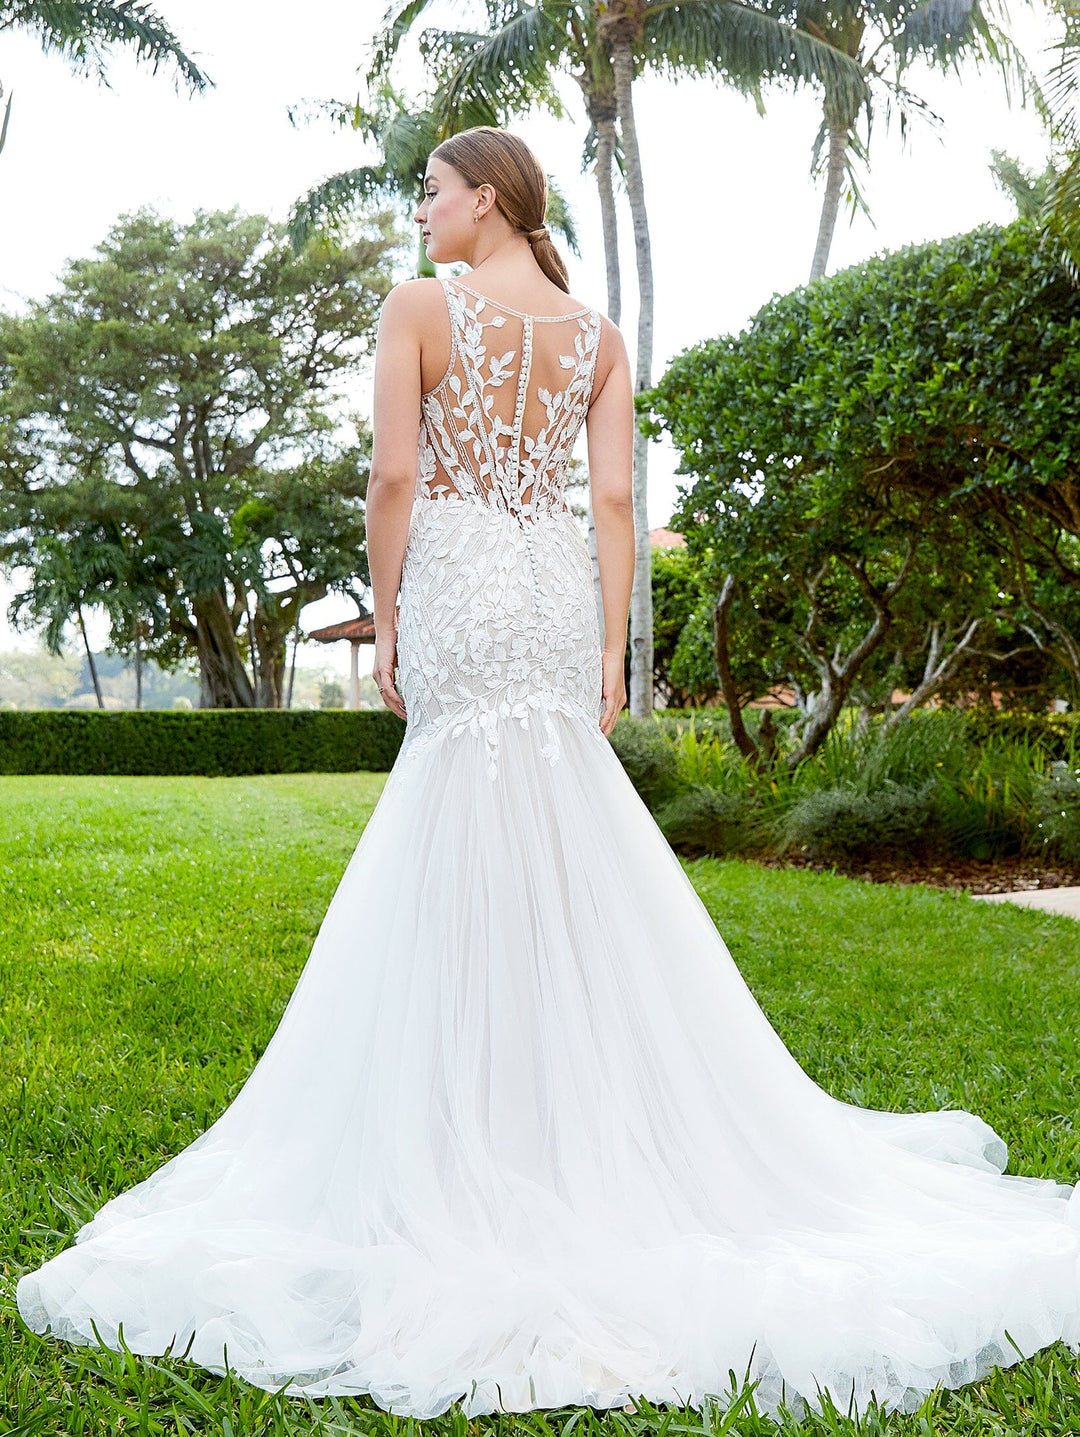 Lace Mermaid Wedding Dress by Adrianna Papell 31176